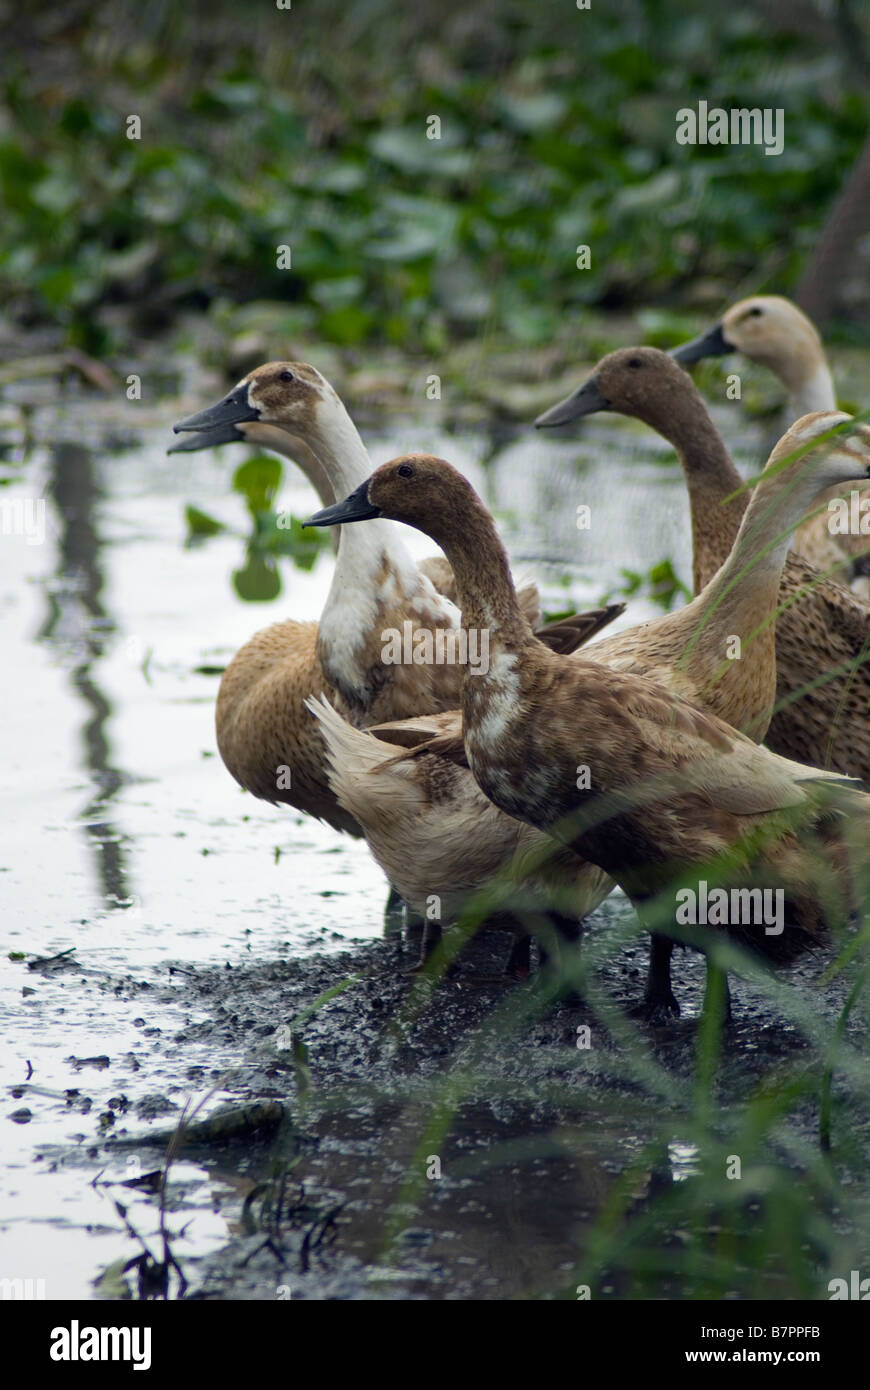 Duck farms are one of the main businesses around Lake Tondano, Sulawesi Stock Photo